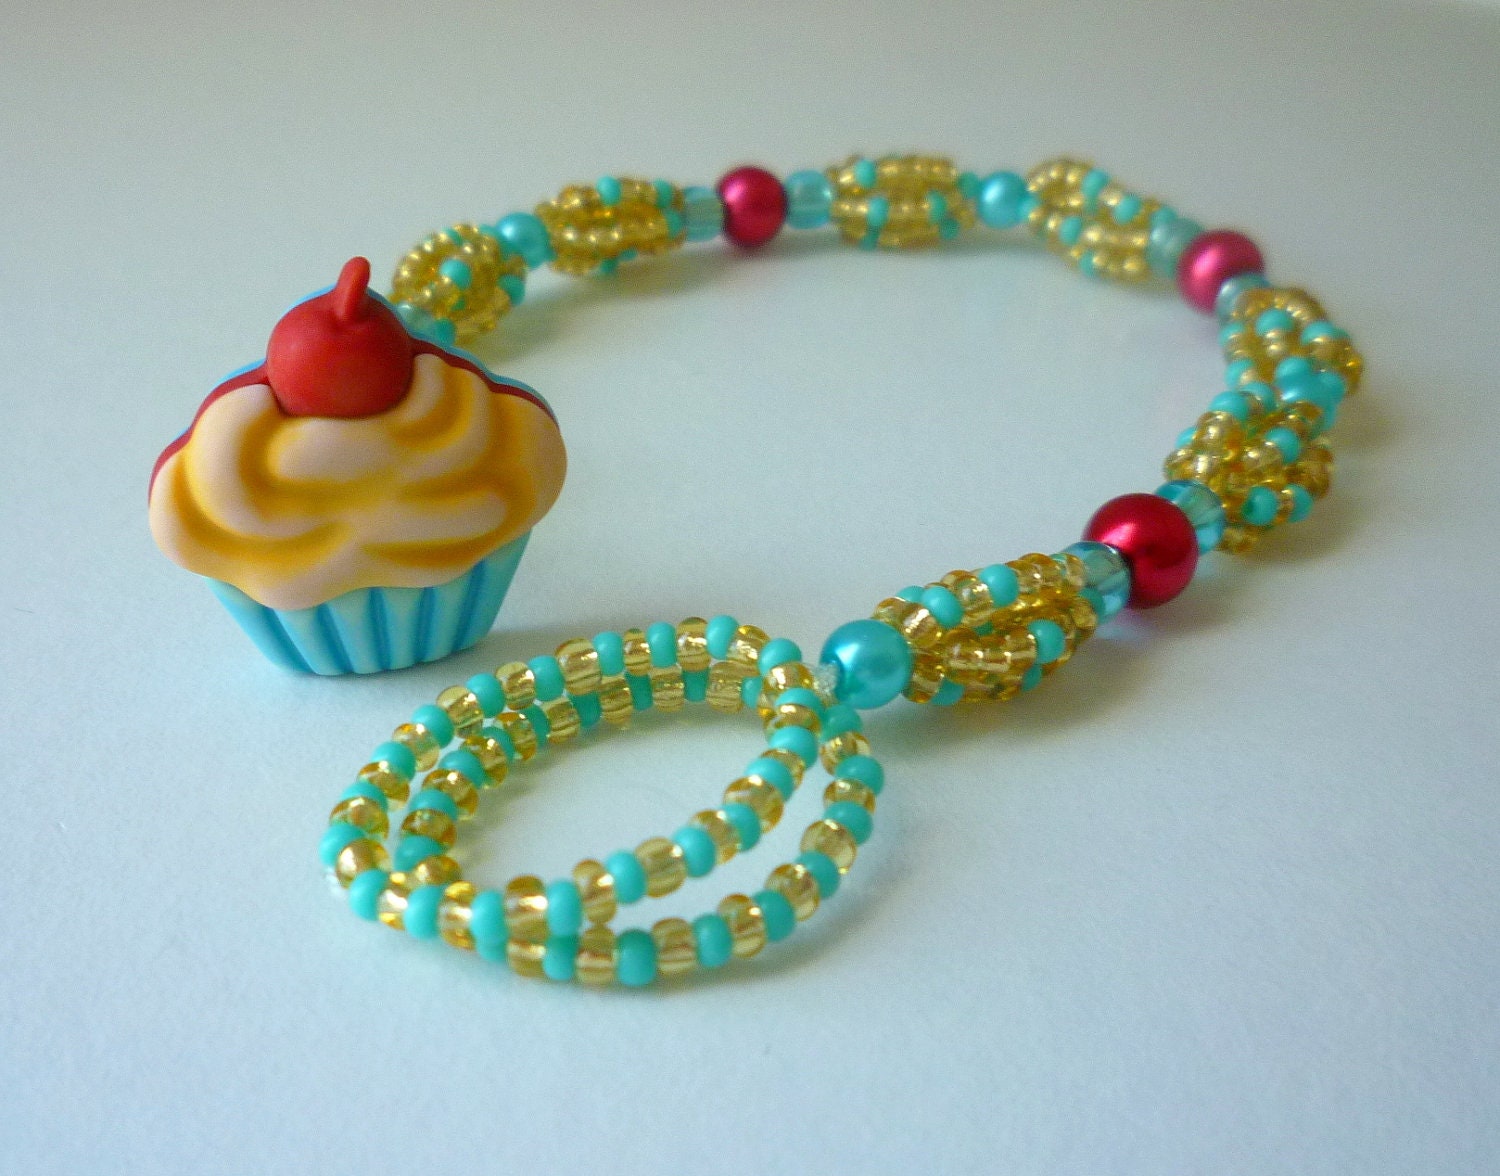 Aqua blue, gold, and red beaded bracelet with a beige and light blue cupcake button closure